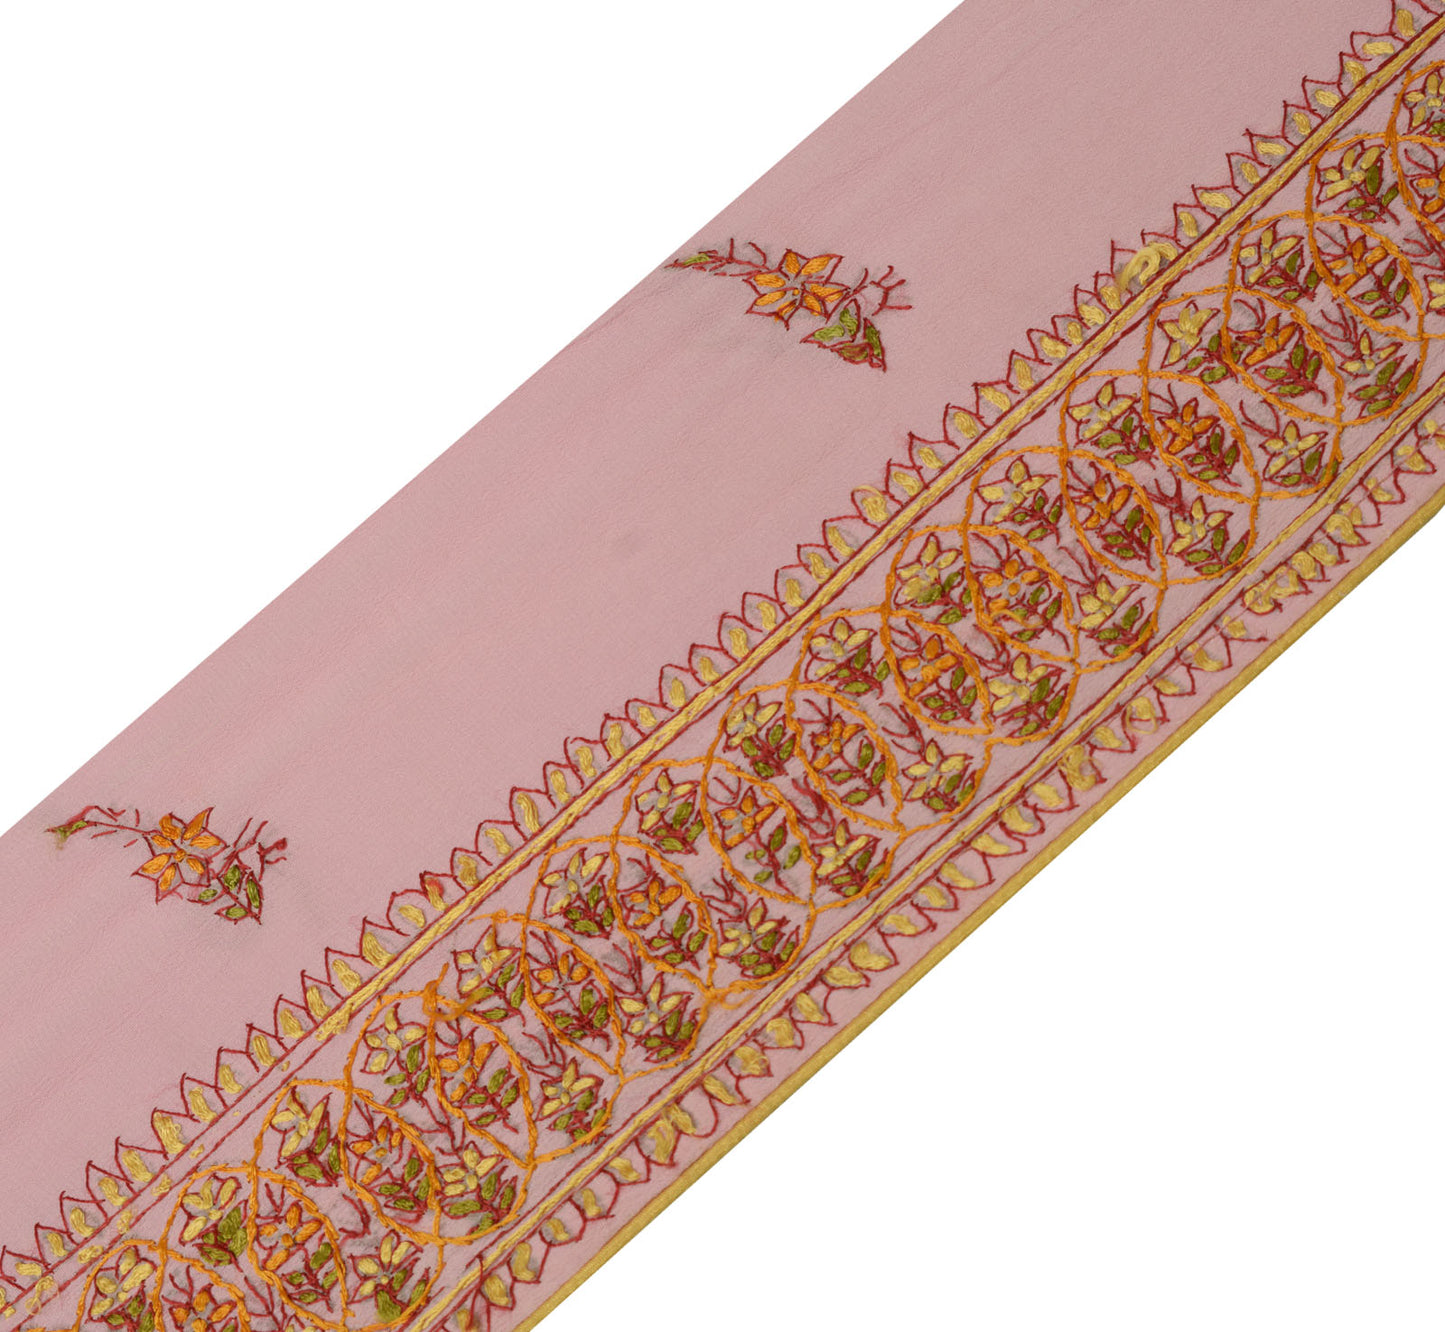 Sushila Vintage Pink Saree Border Craft Sewing Trim Hand Embroidered Lace Ribbon